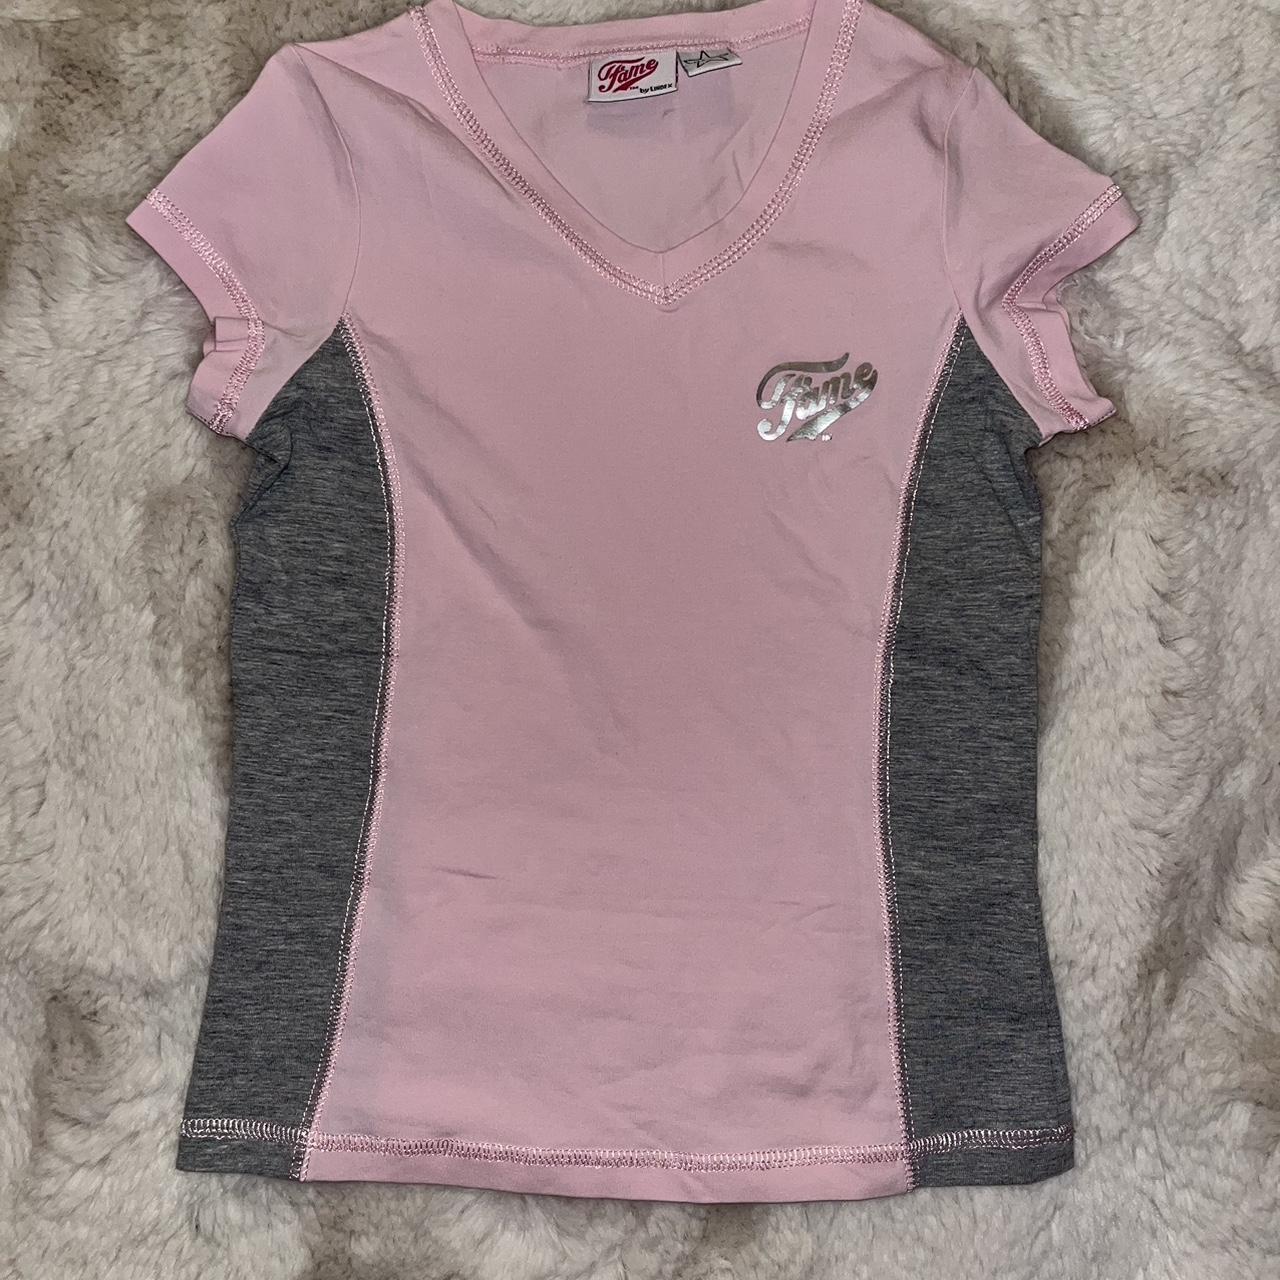 Lindex Women's Pink and Grey T-shirt